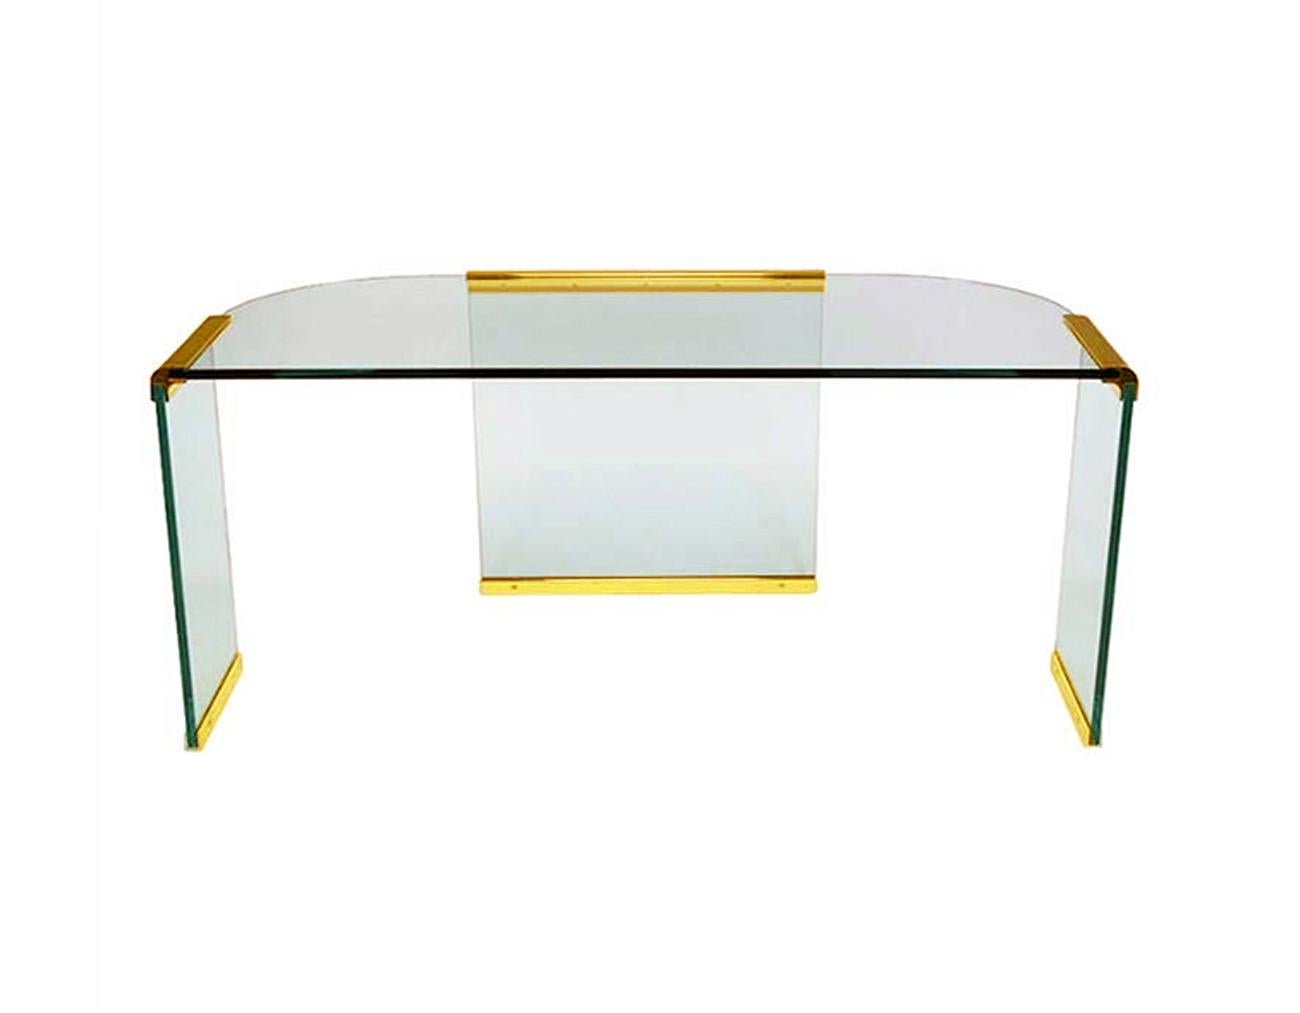 Late 20th Century Mid-Century Modern Brass & Glass Desk or Console Table by Leon Rosen for Pace